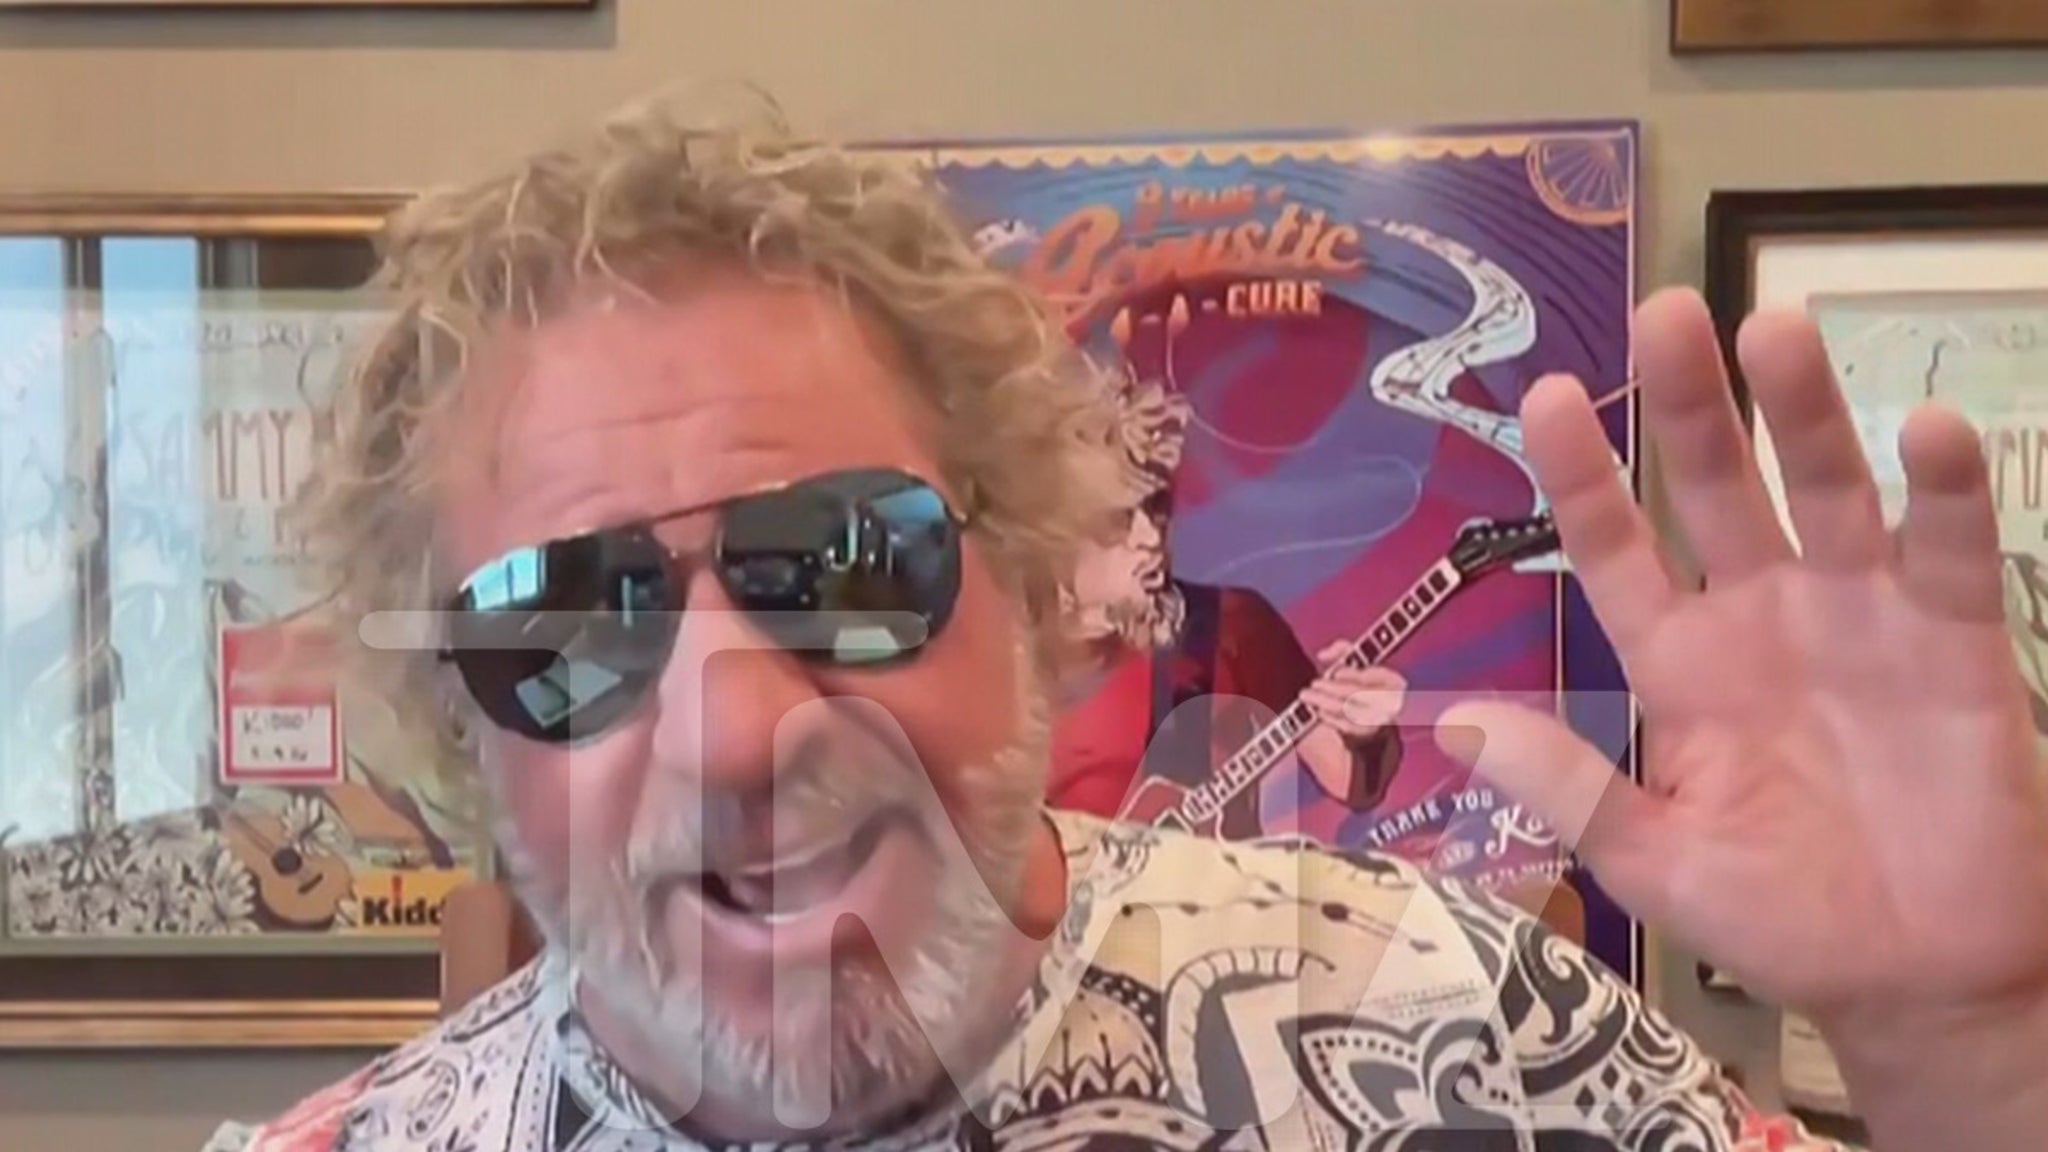 Sammy Hagar says he makes money from booze and bars, music is just for fun